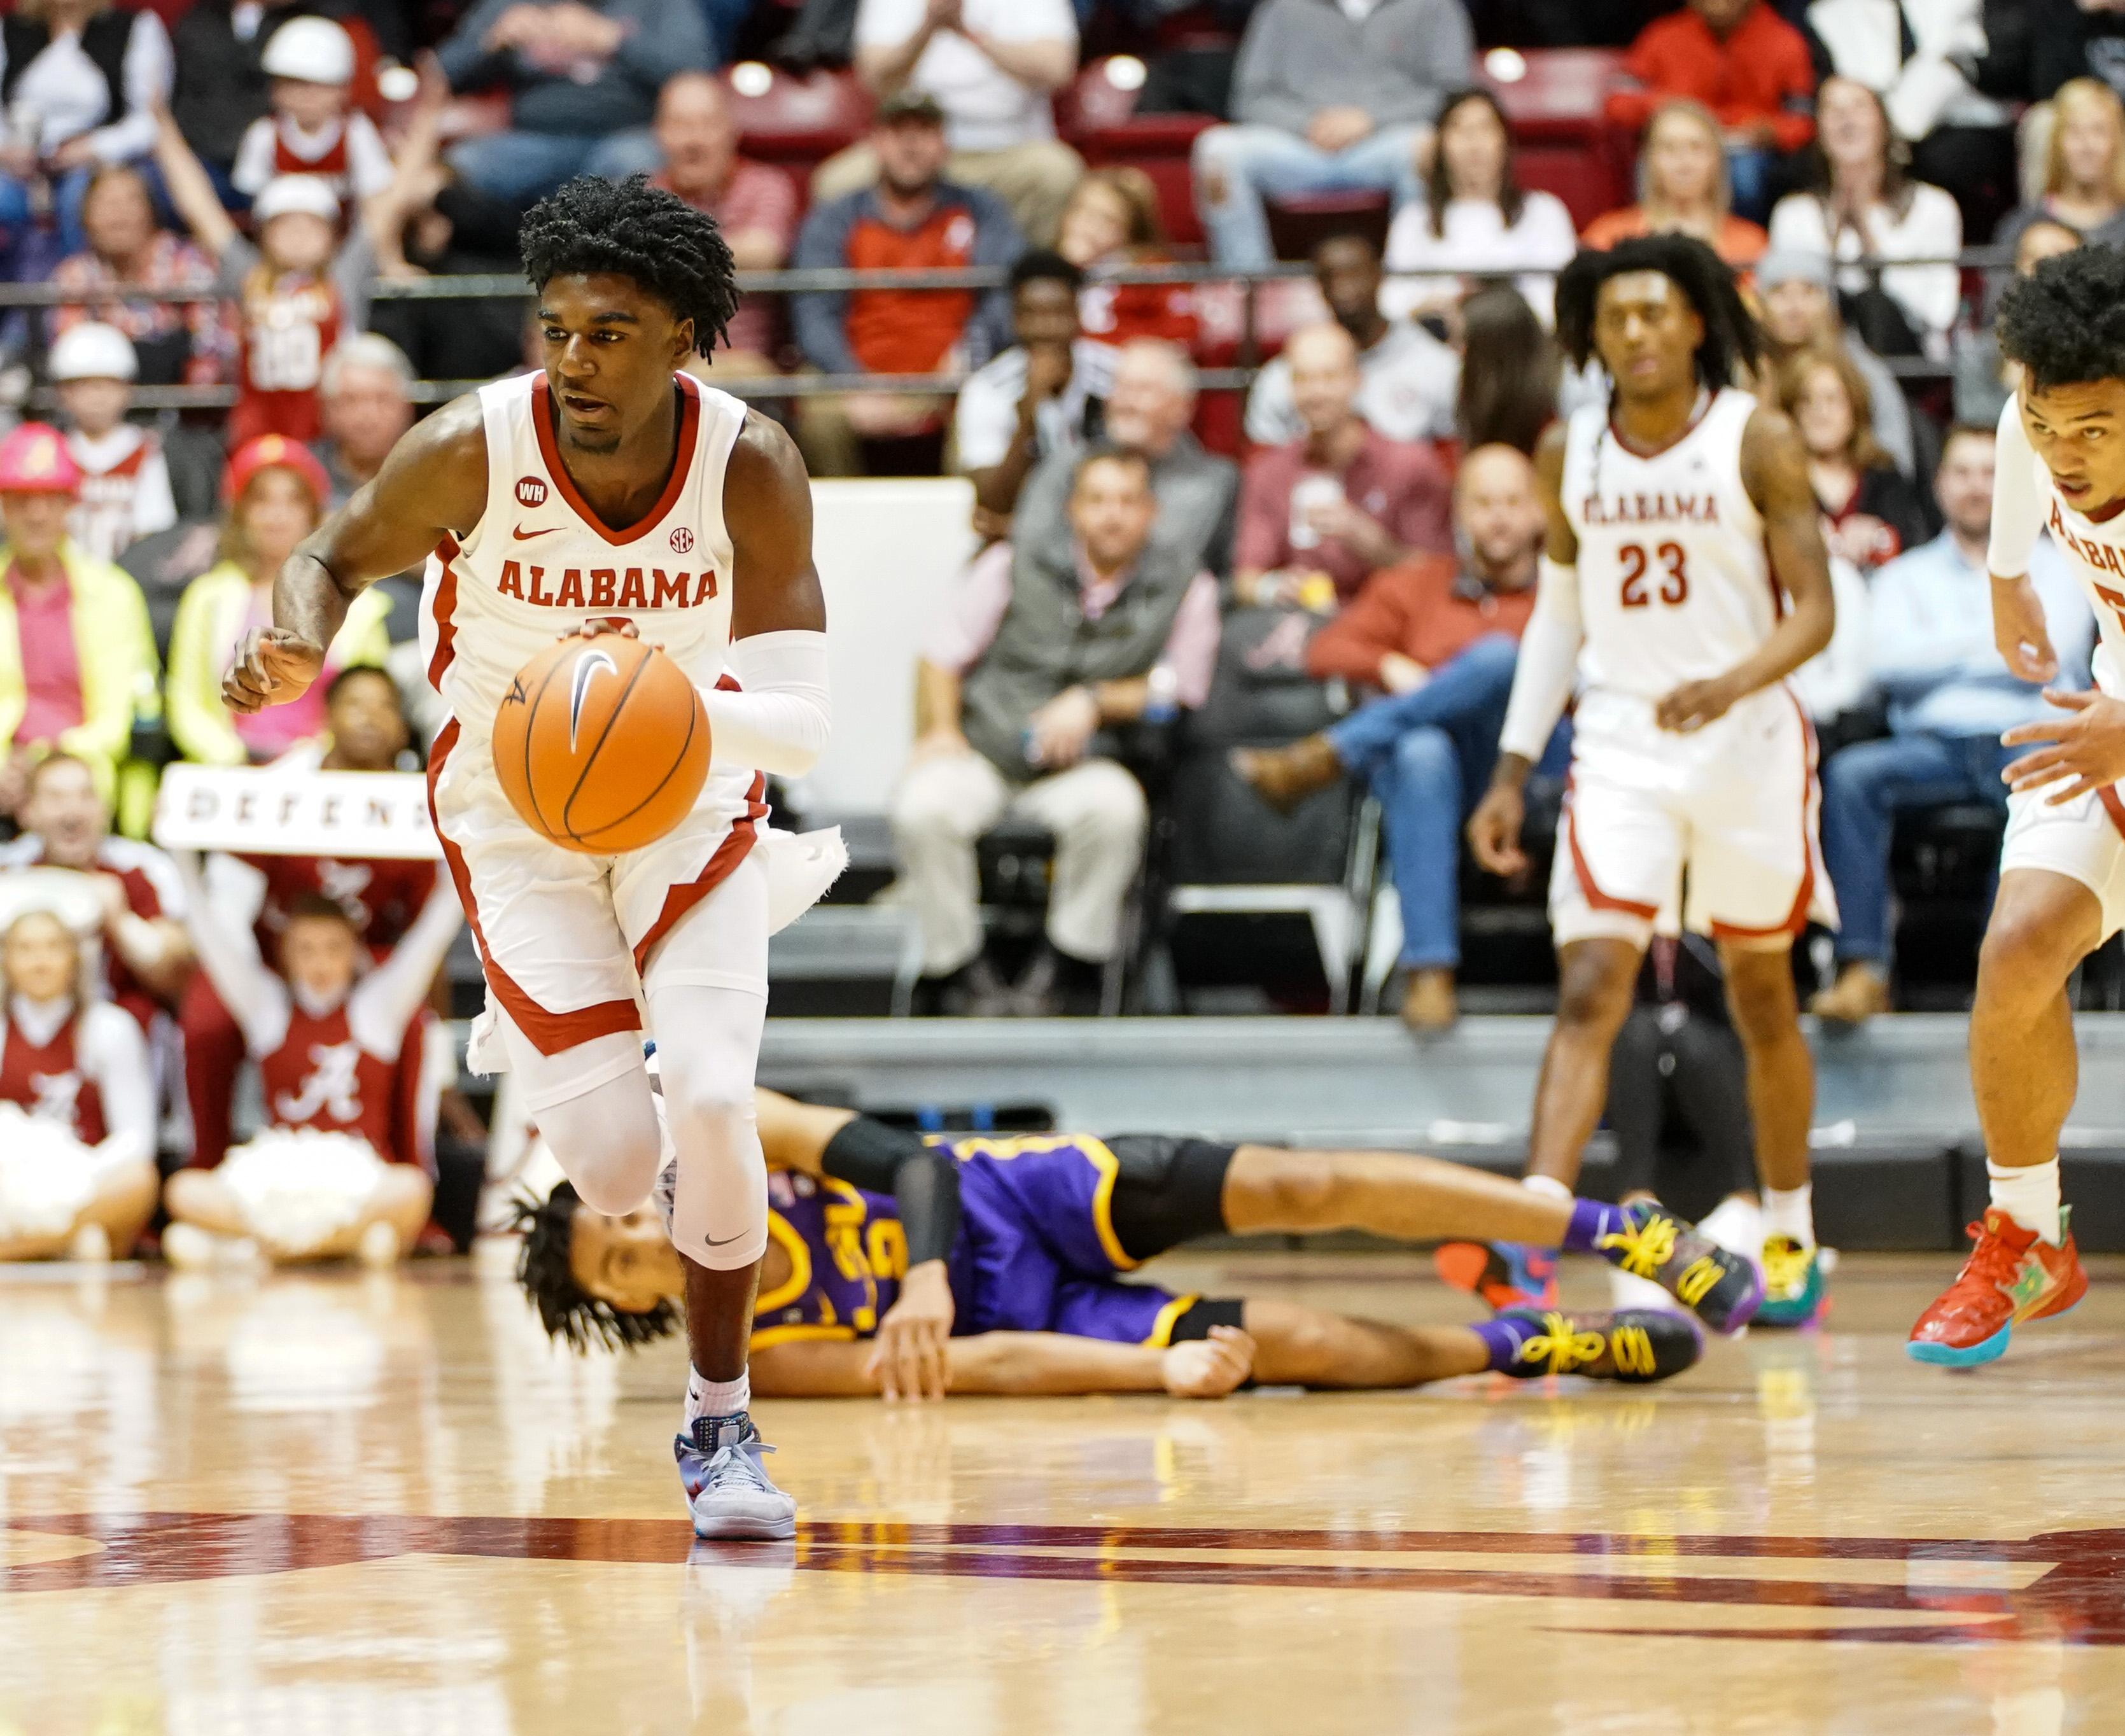 Feb 15, 2020; Tuscaloosa, Alabama, USA; Alabama Crimson Tide guard Kira Lewis Jr. (2) drives the ball to the basket against LSU Tigers during the second half at Coleman Coliseum. Mandatory Credit: Marvin Gentry-USA TODAY Sports / © Marvin Gentry-USA TODAY Sports